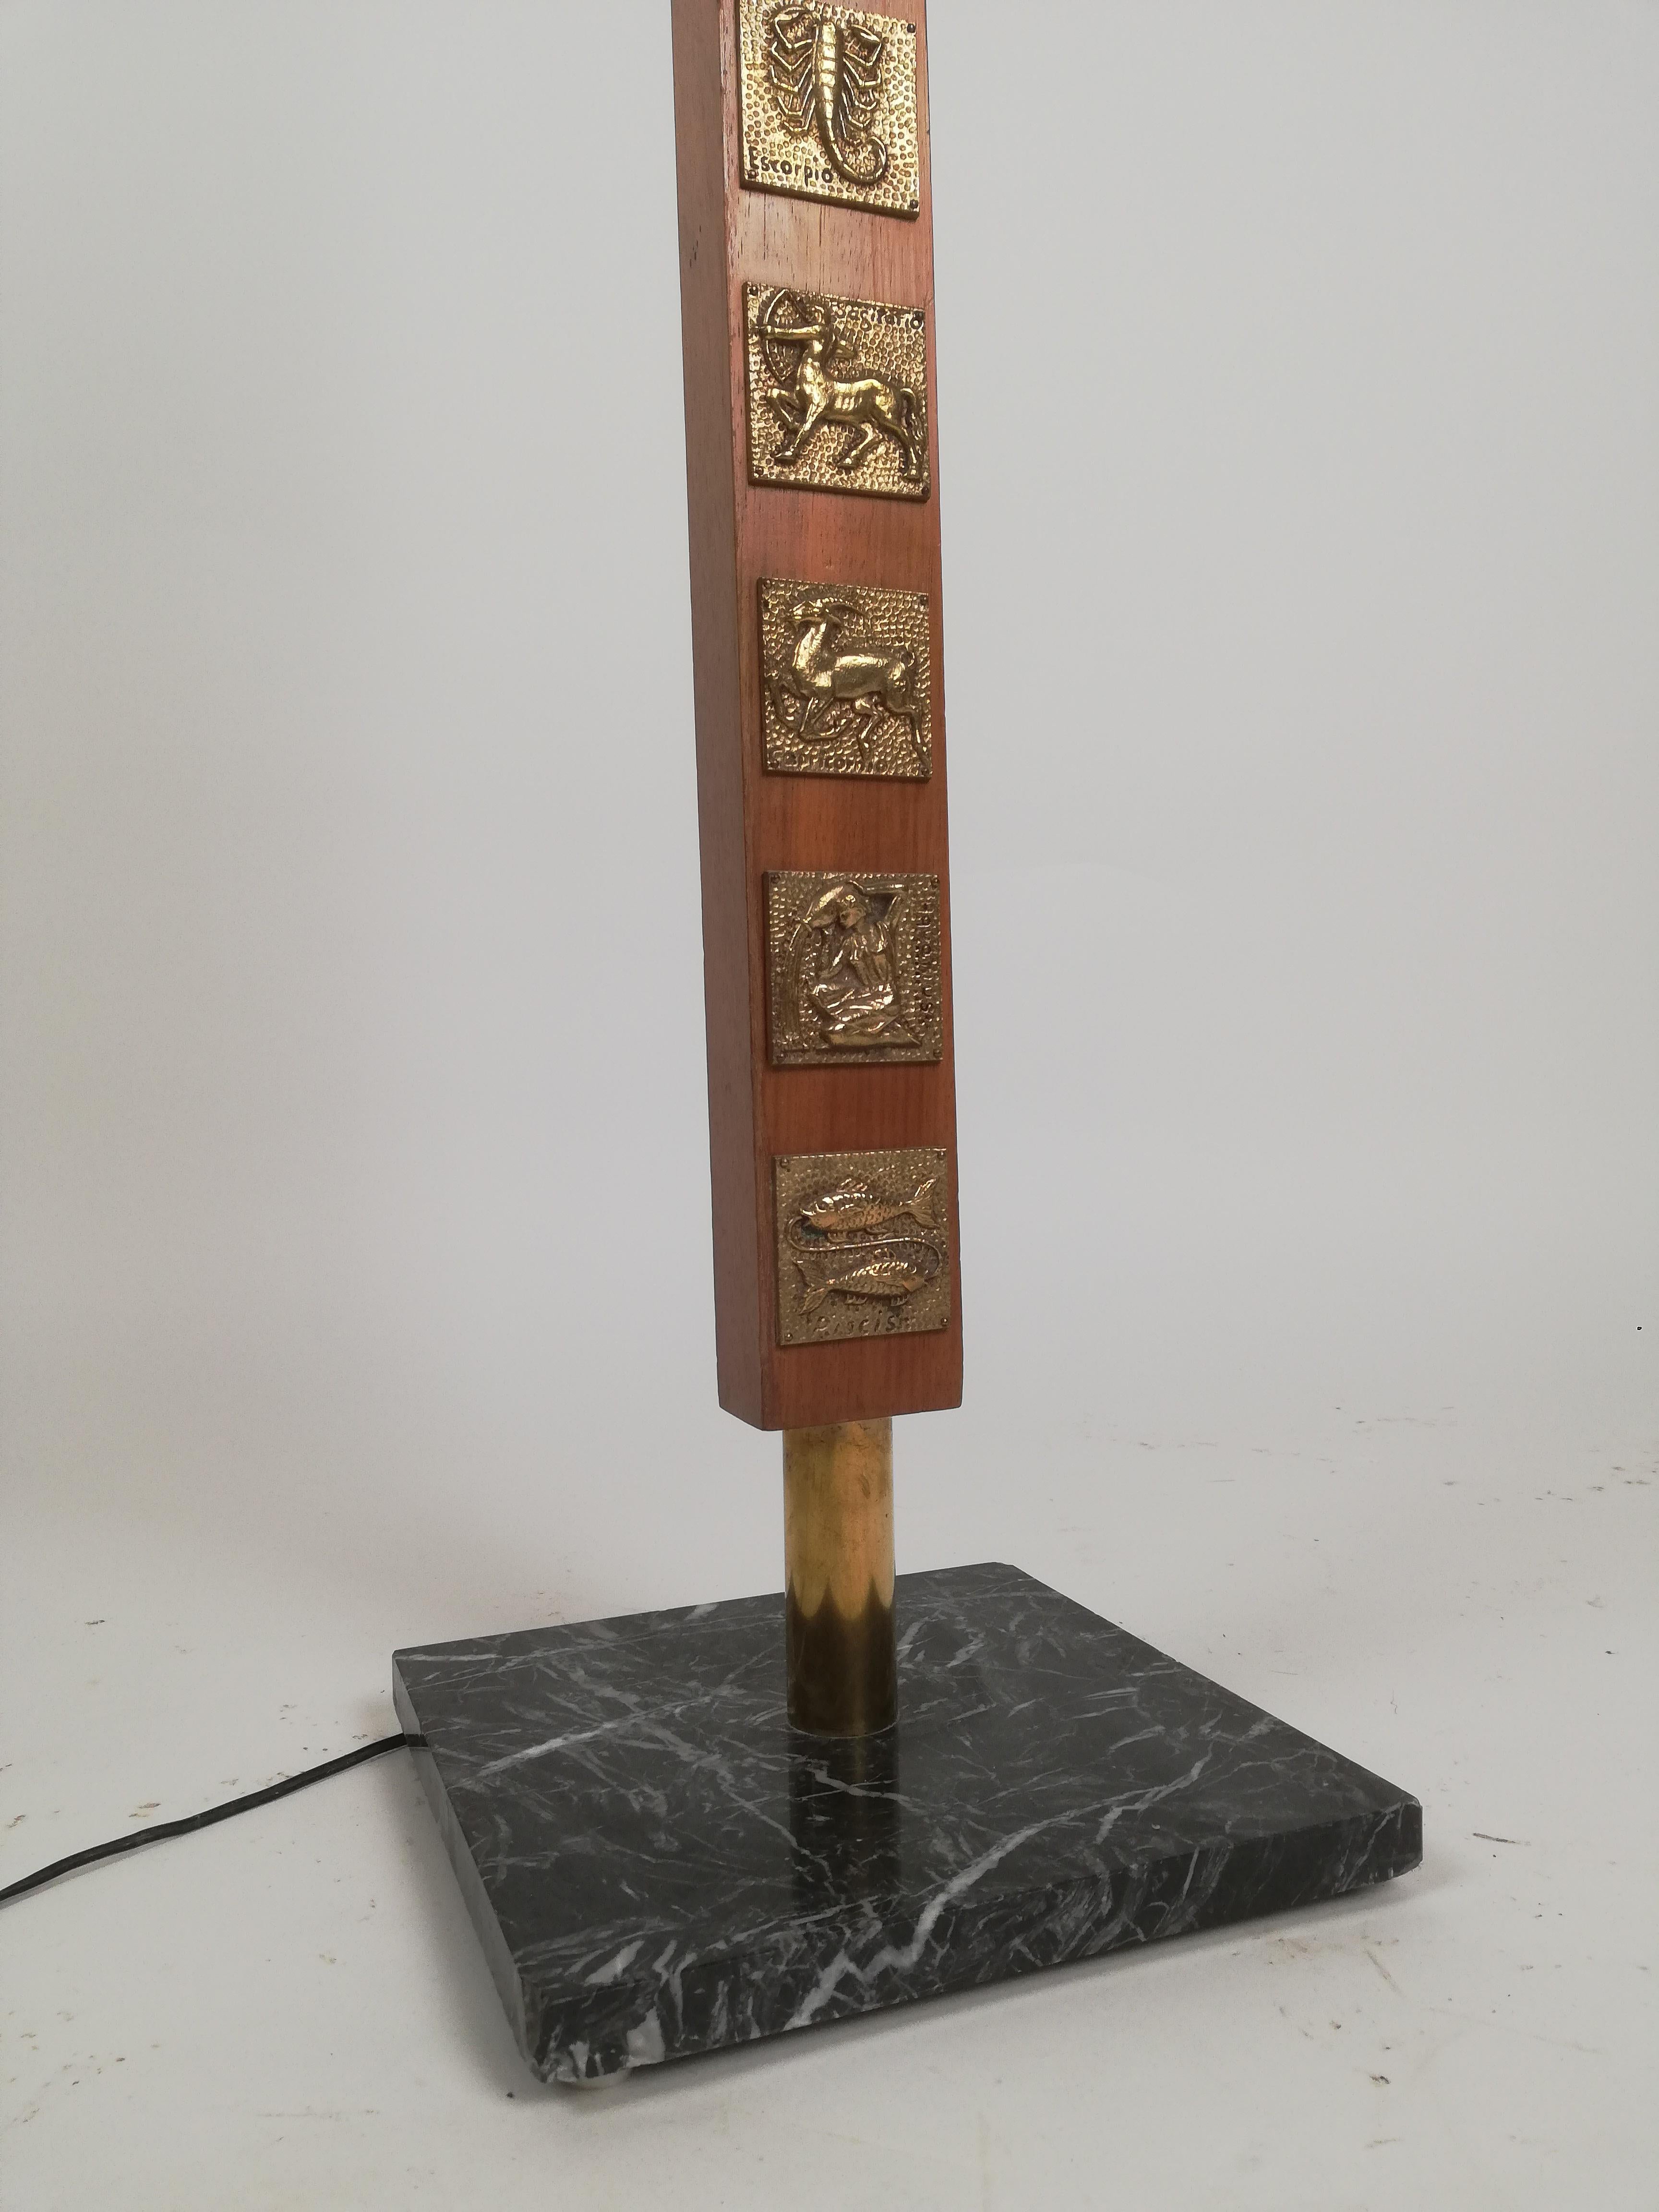 Midcentury Floor Lamp Decorated with Zodiac Sign in the Style of P. Fornasetti For Sale 12